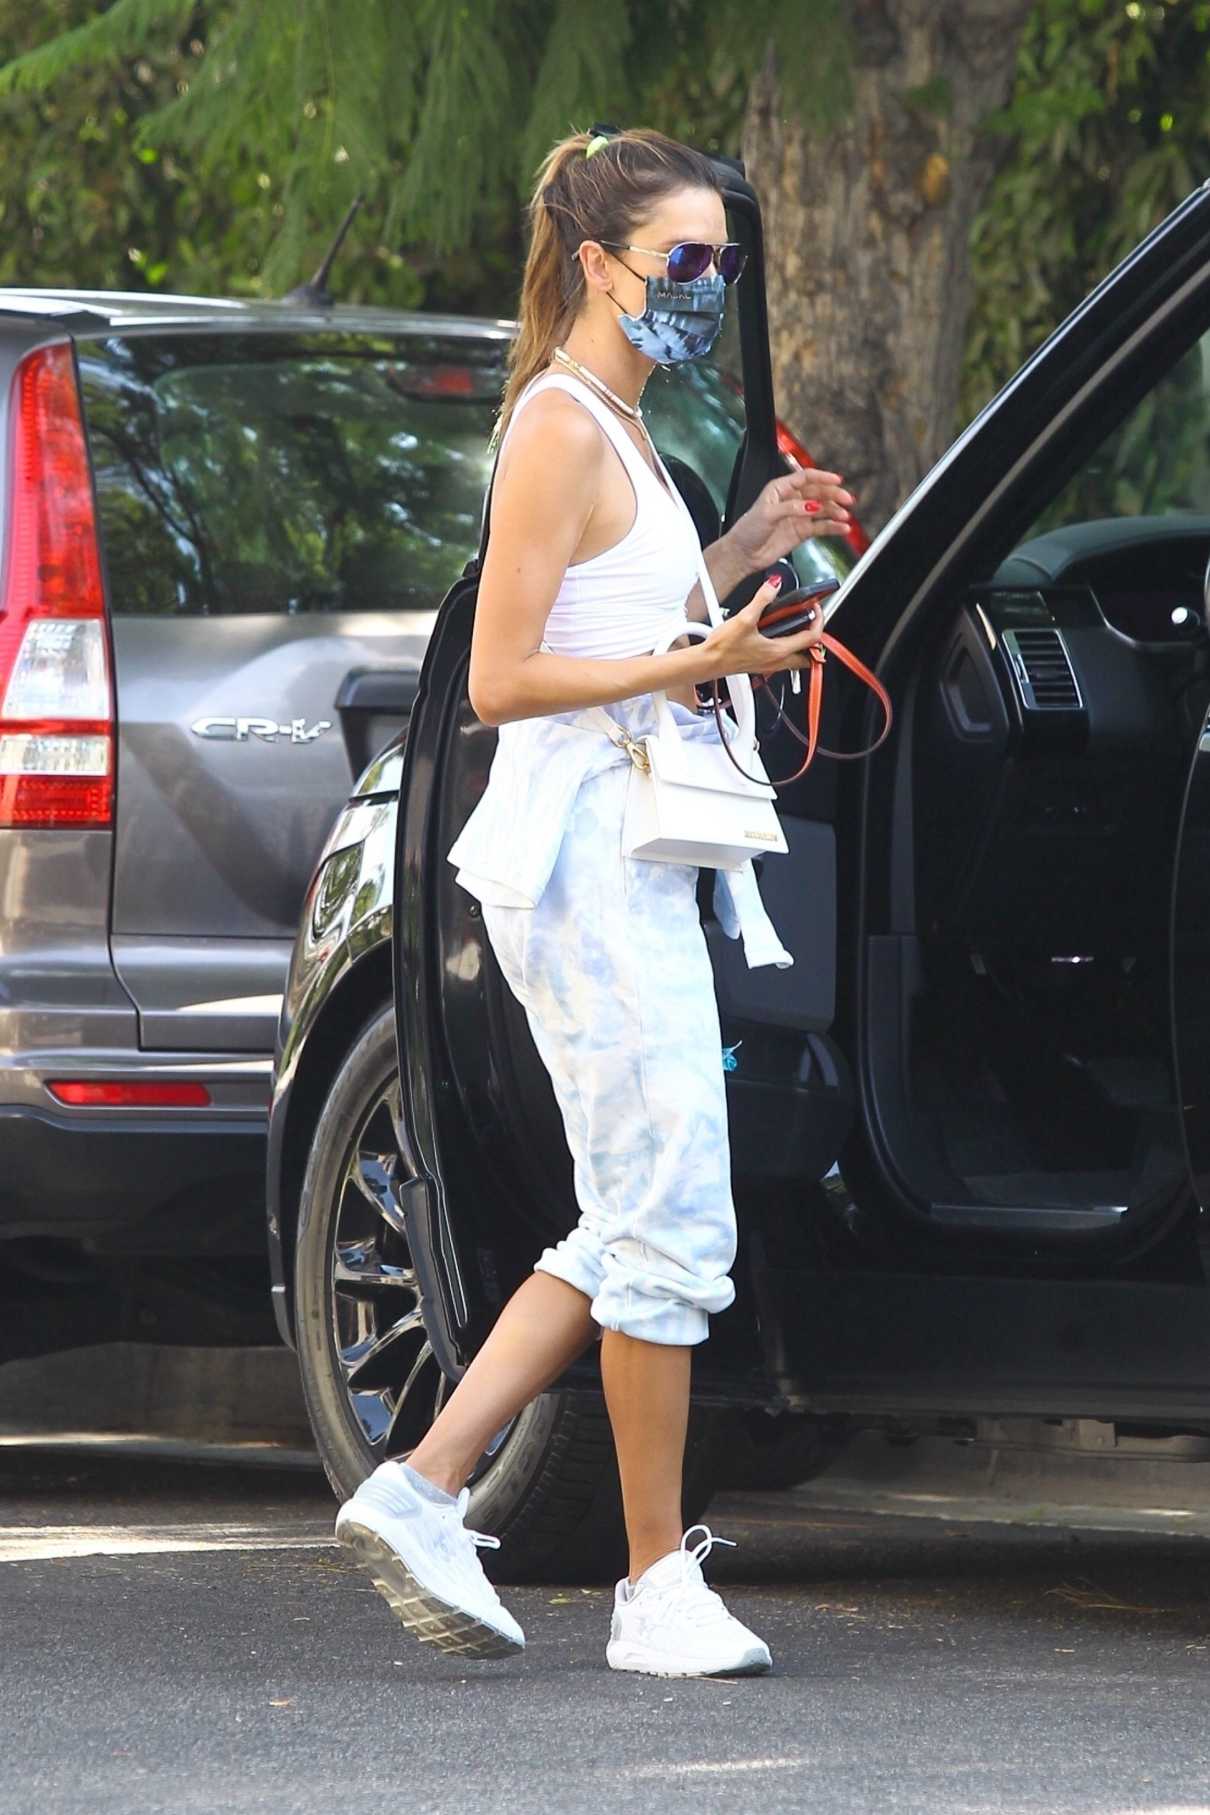 Alessandra Ambrosio in a White Sports Bra Arrives at a Friend’s House ...